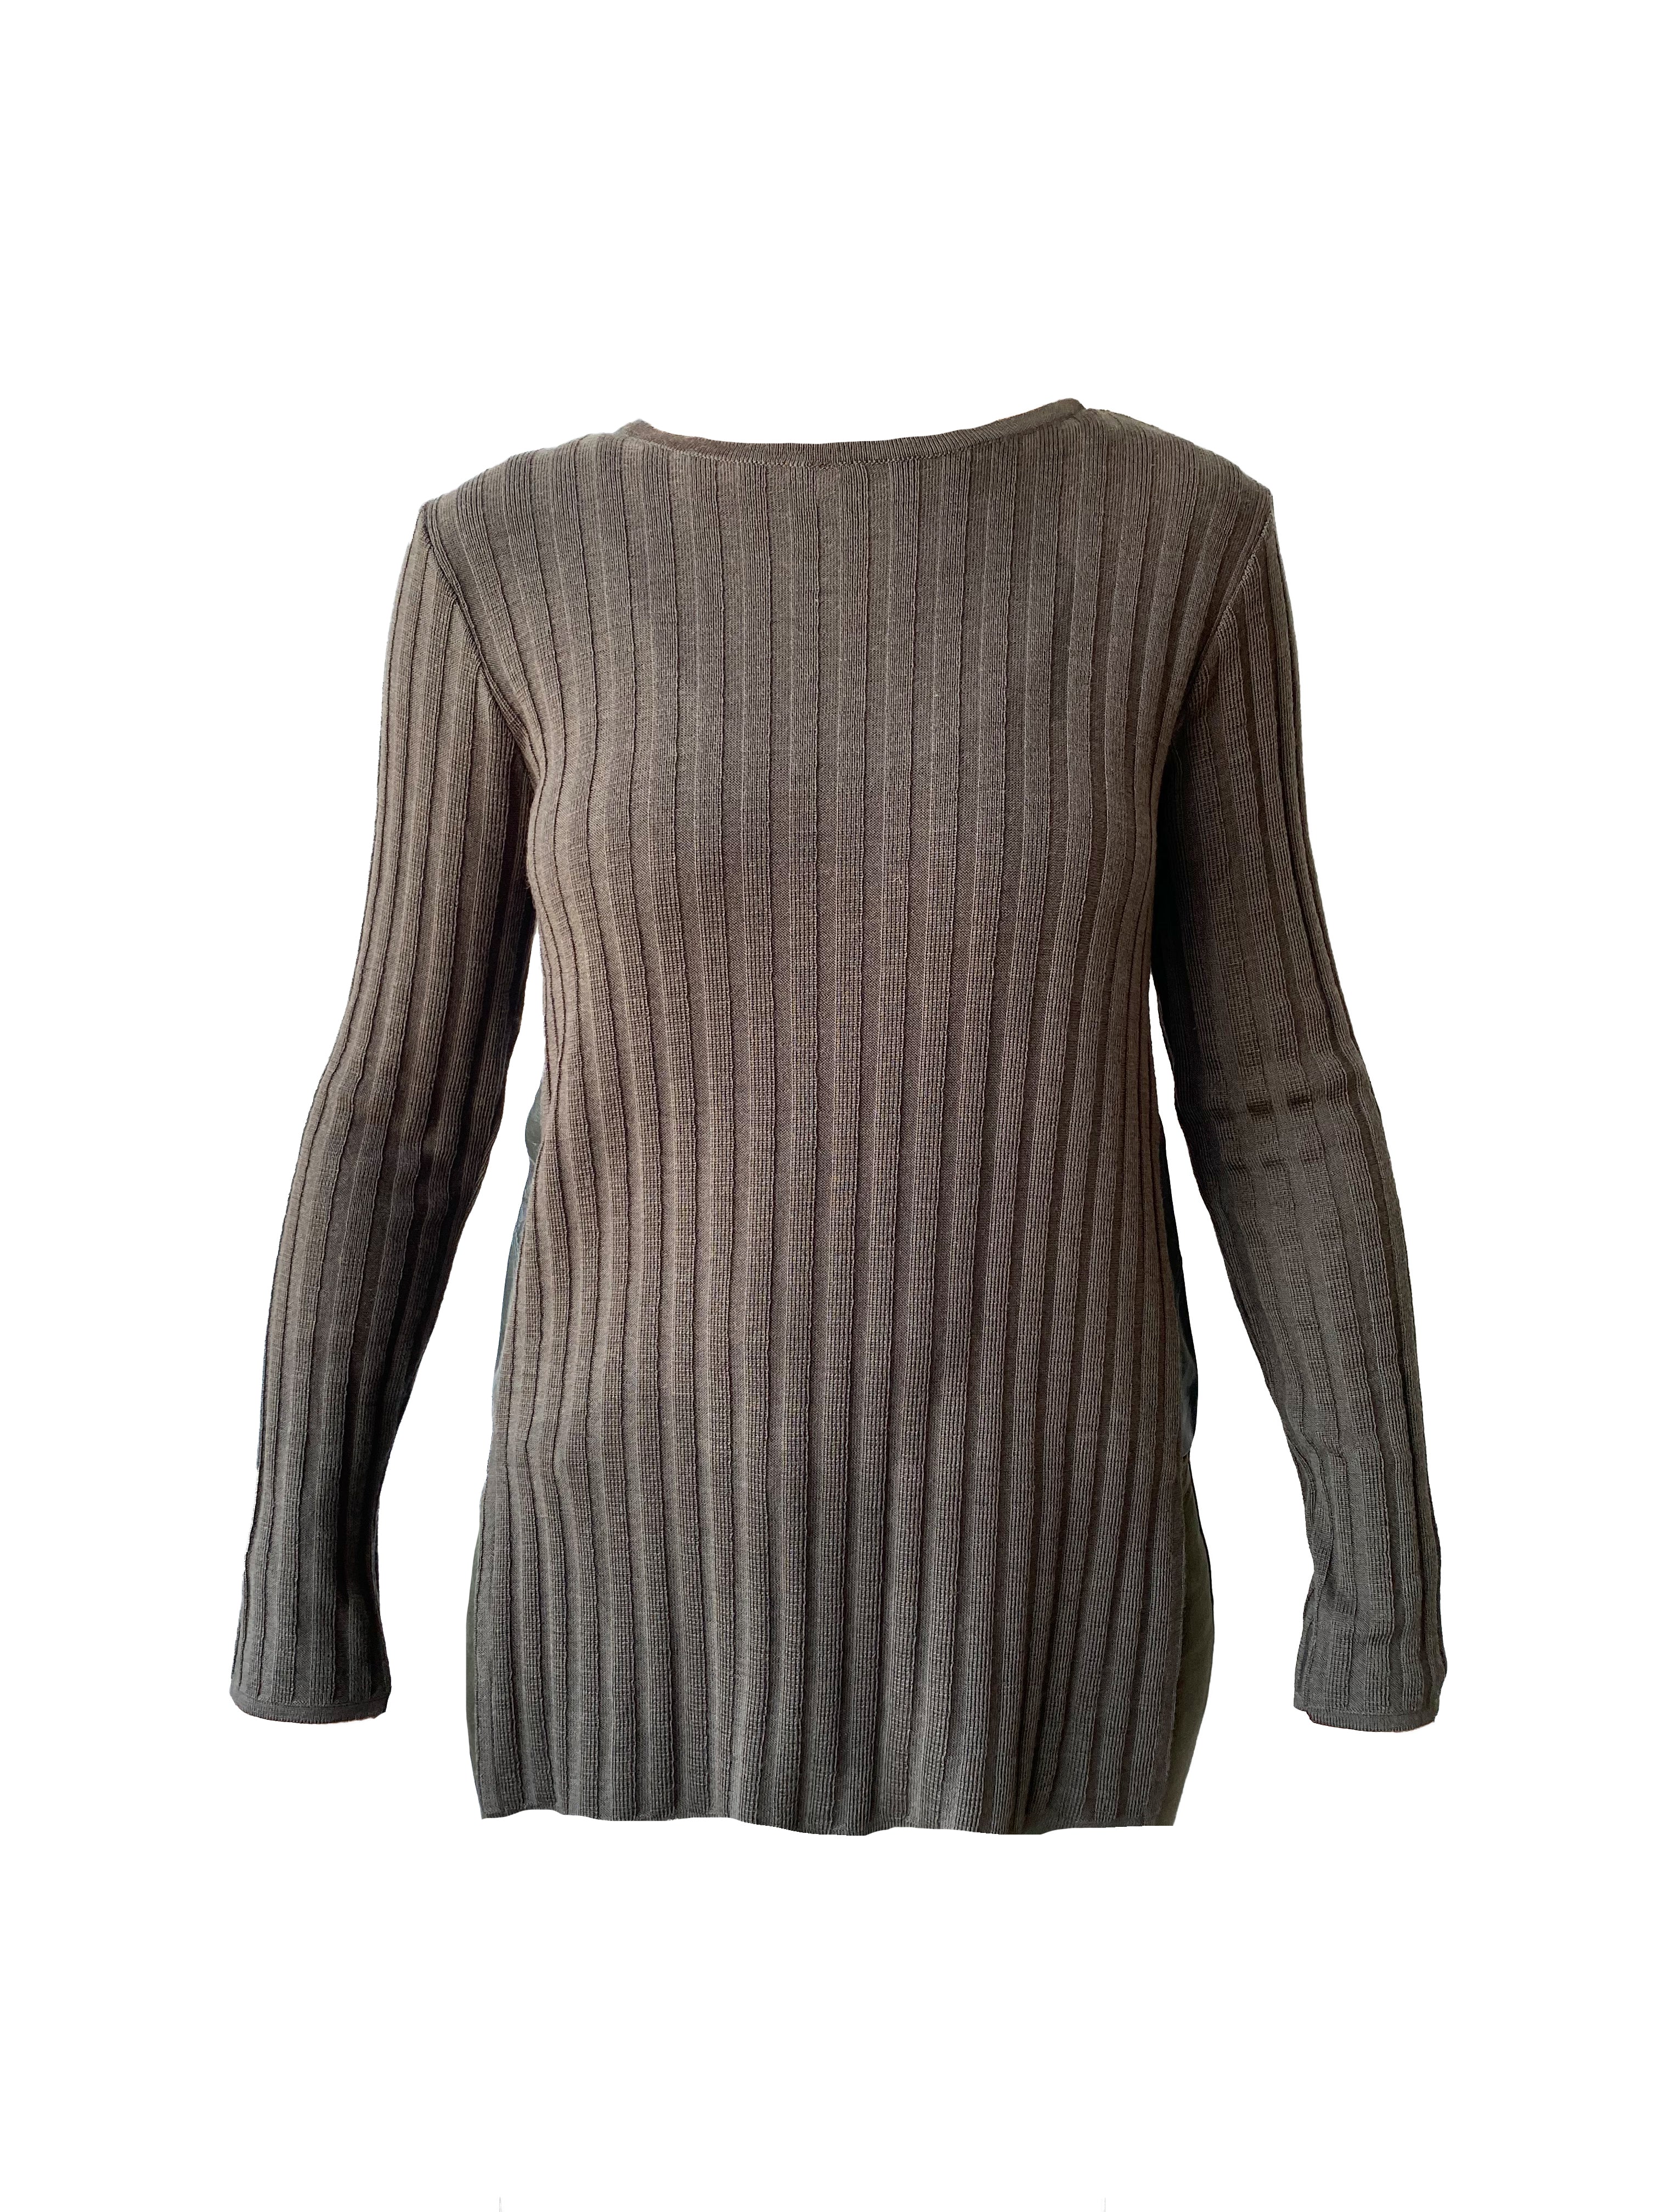 Rib Knit Top with Leather Side Panels